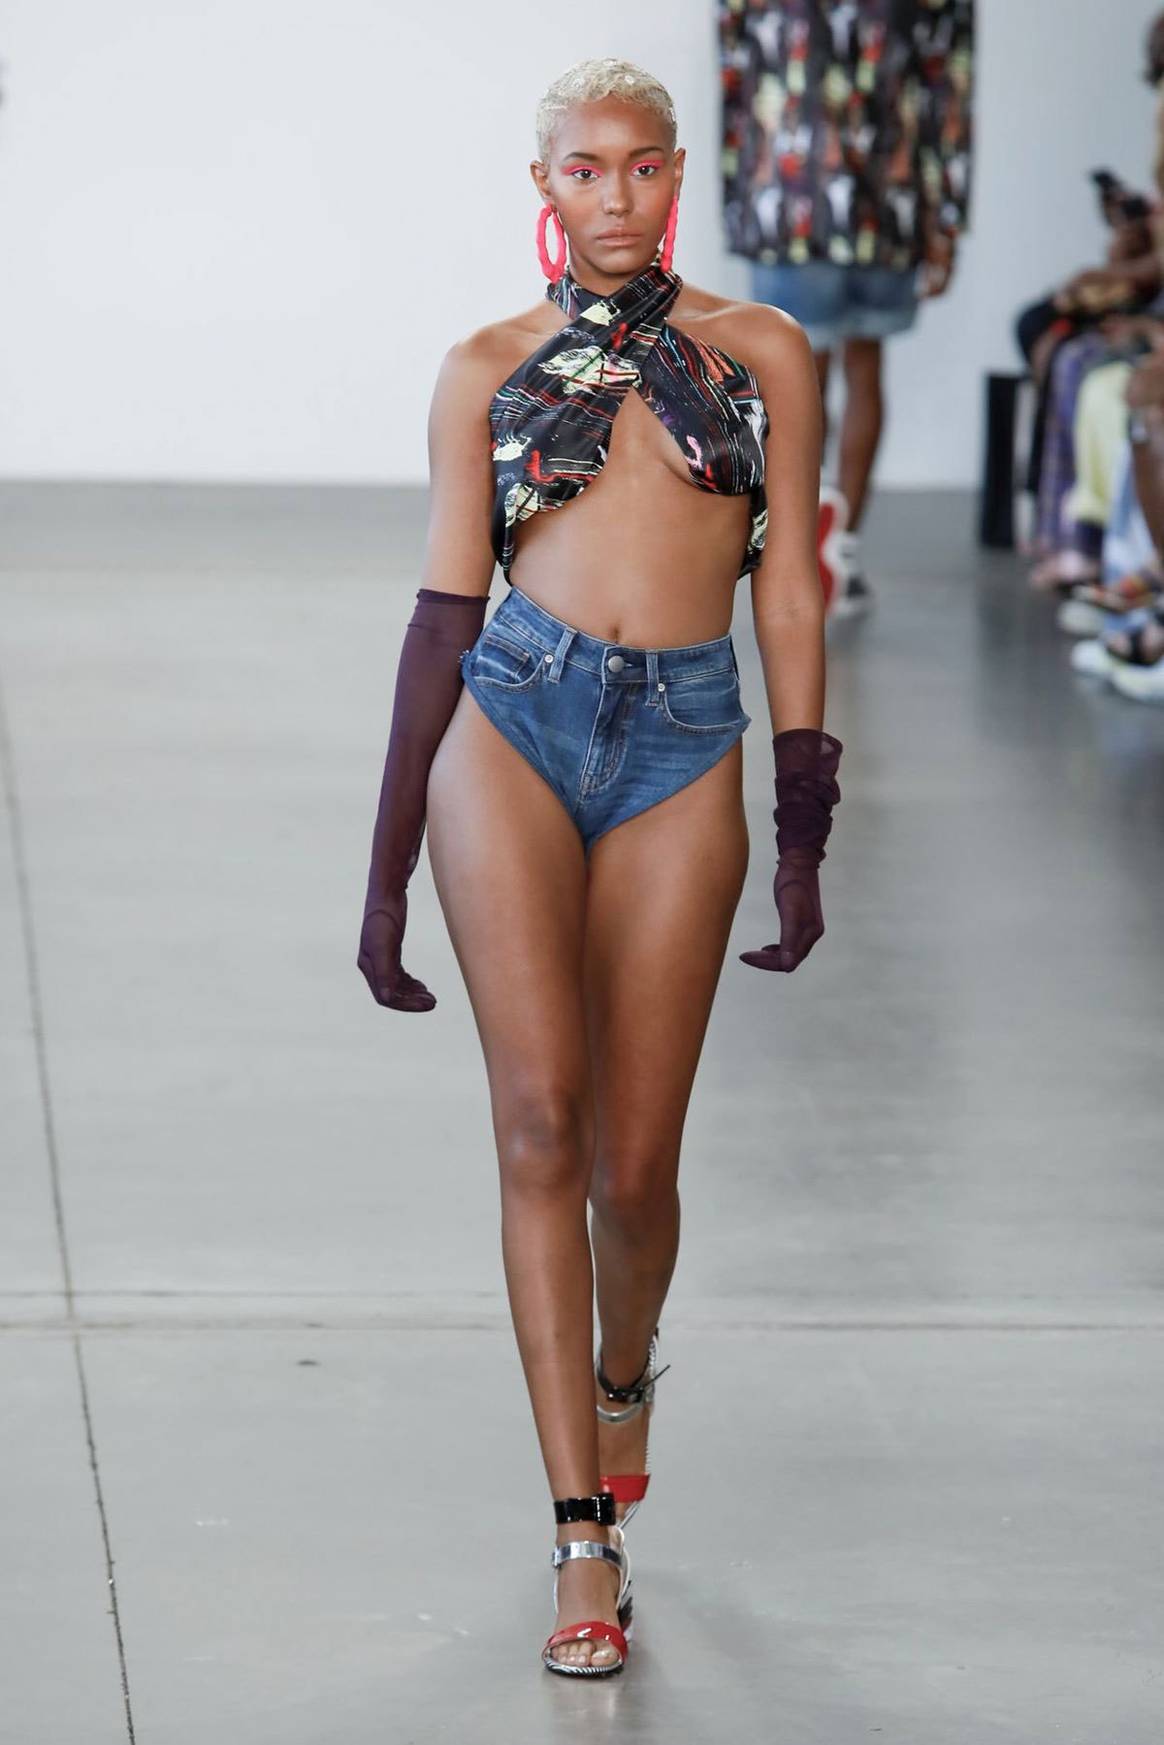 New York Fashion Week sees brands going sexier